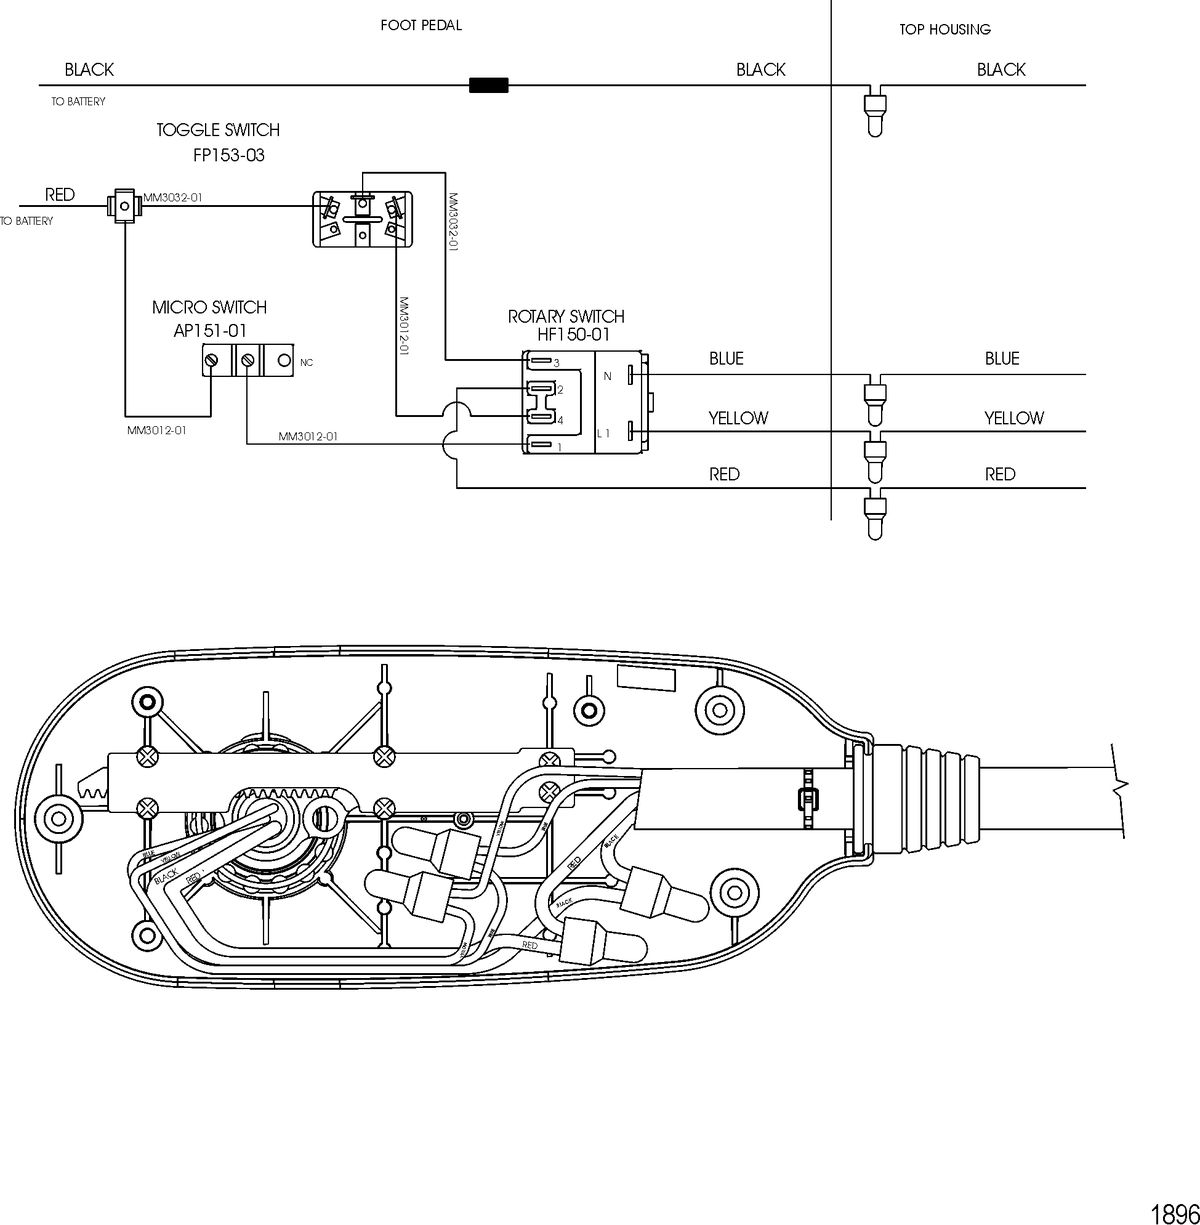 TROLLING MOTOR MOTORGUIDE PRO AND TRACKER SERIES Wire Diagram(Model MP5200) (12 Volt)